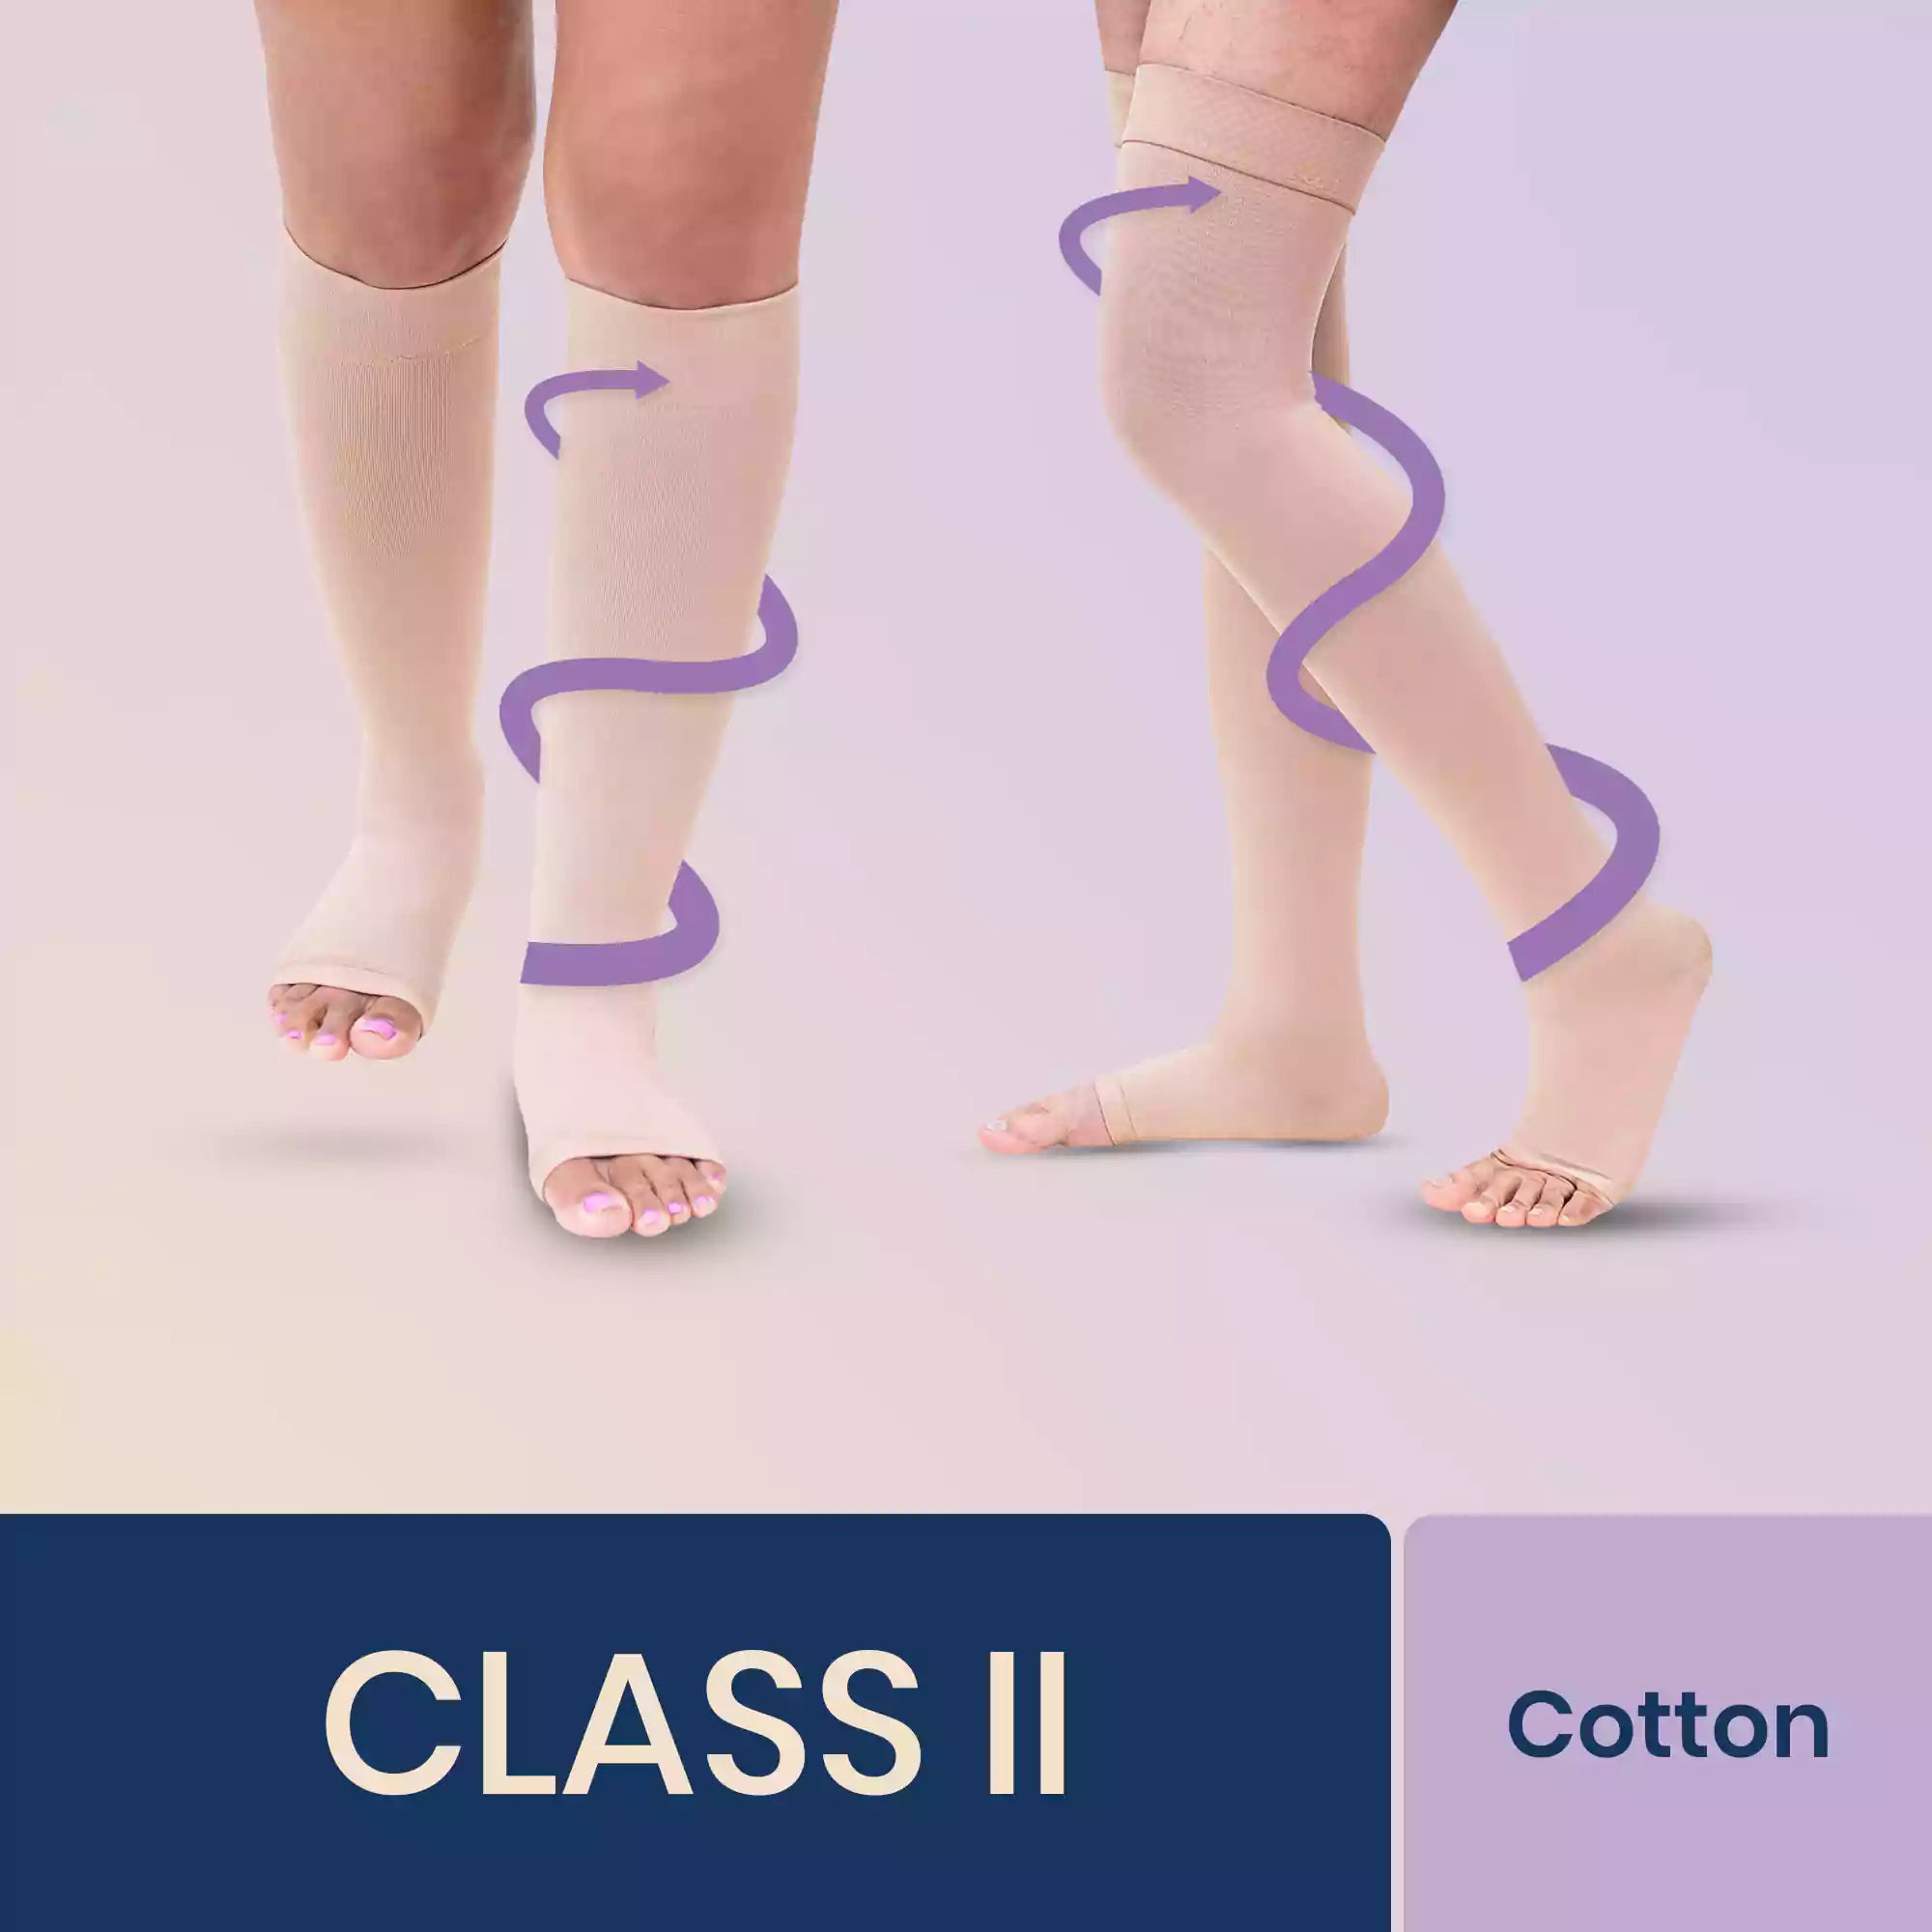 Shop Compression Stockings for Varicose Veins Online –